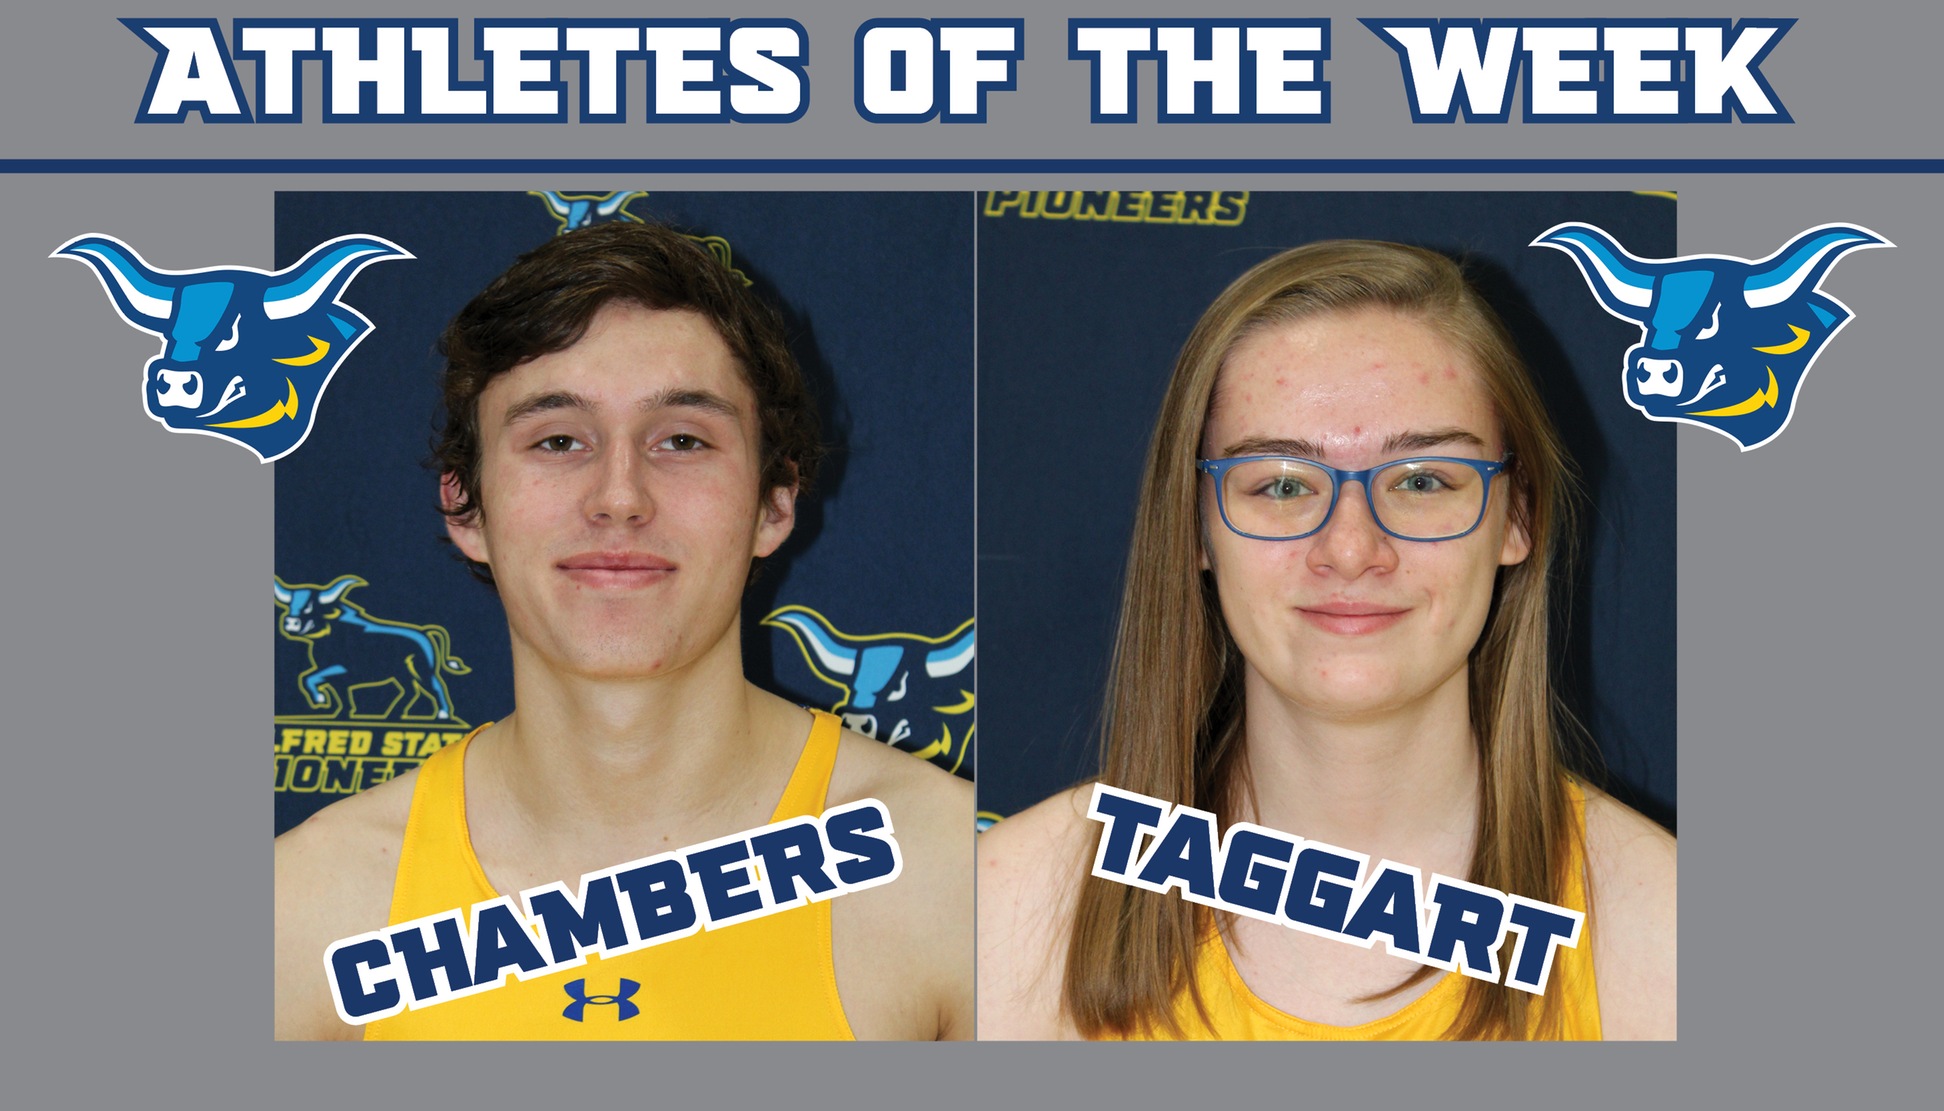 Taggart and Chambers Named Athletes of the Week